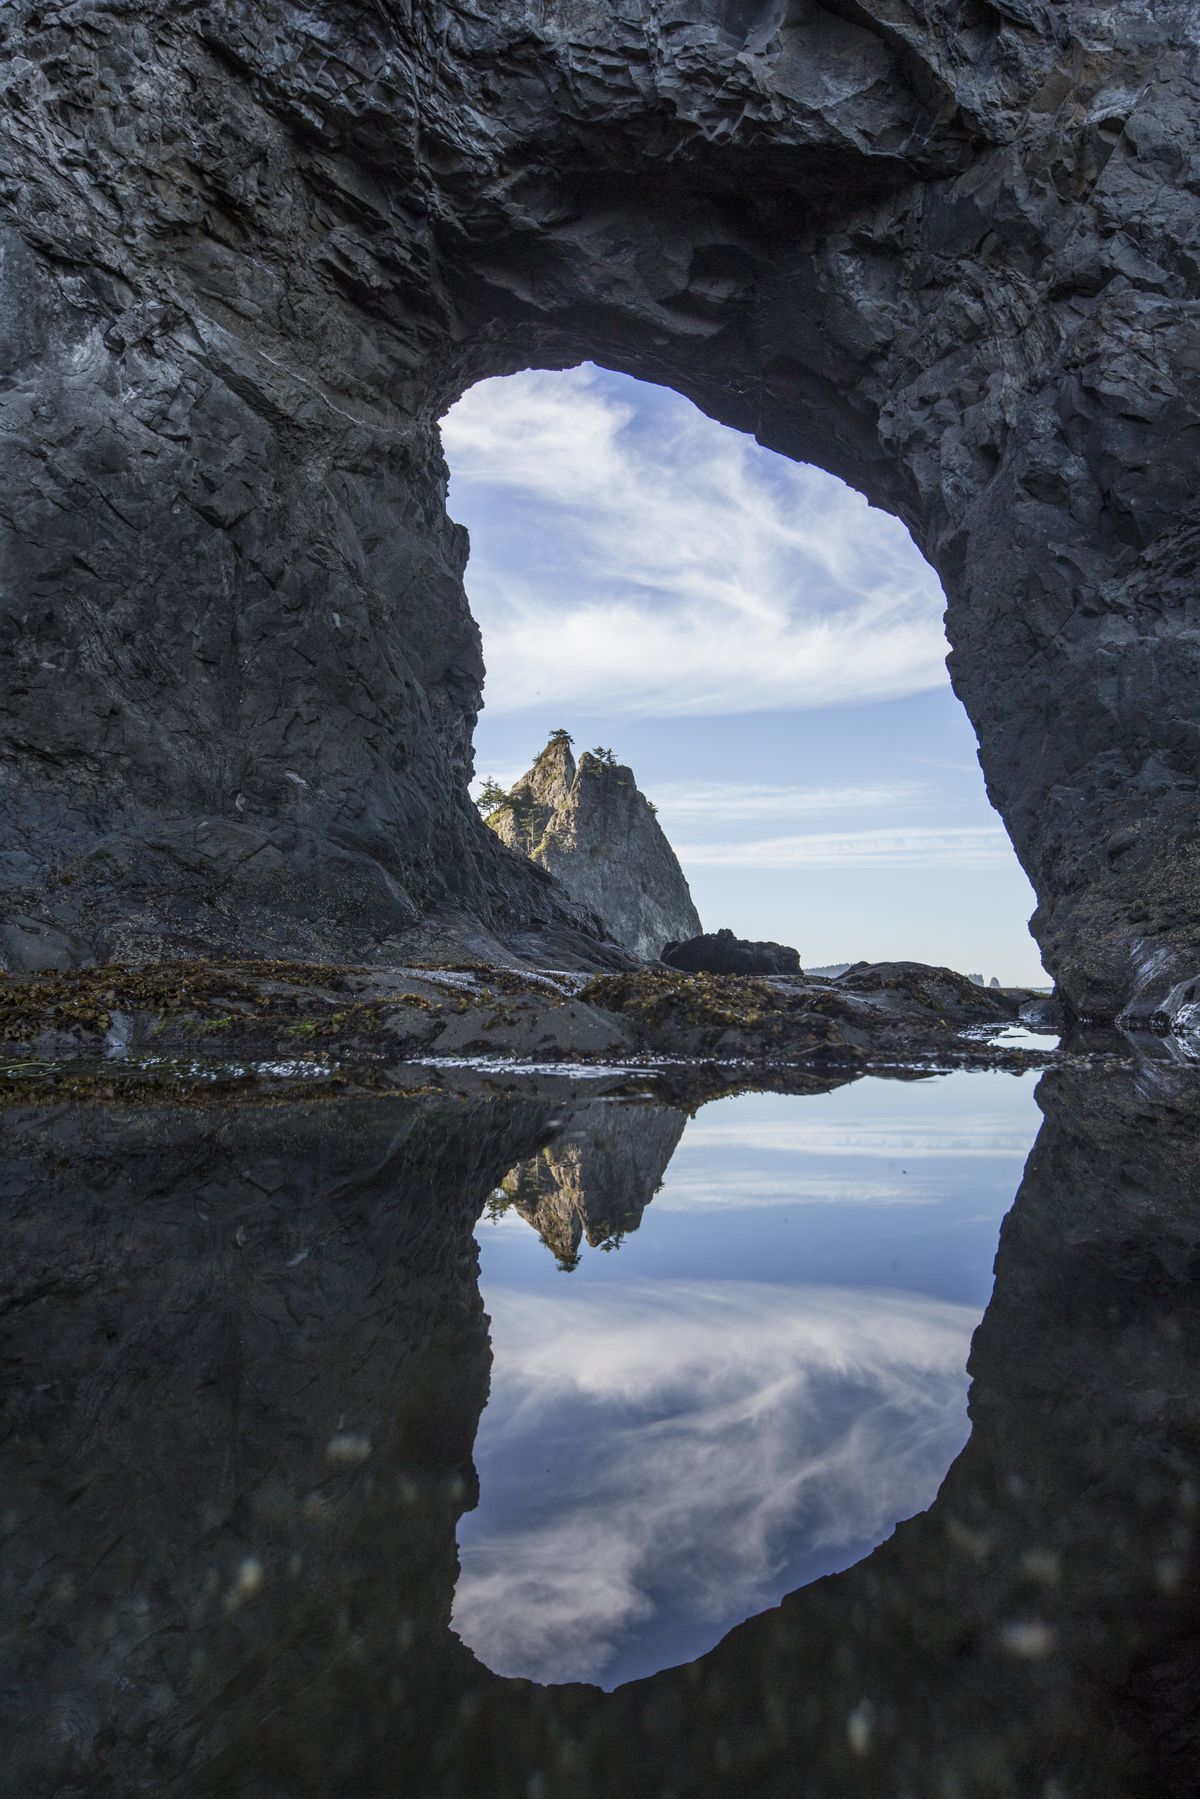 Hole in the Wall, shown here reflected in a tide pool, is a popular destination at Olympic National Park’s Rialto Beach. (STEVE RINGMAN)